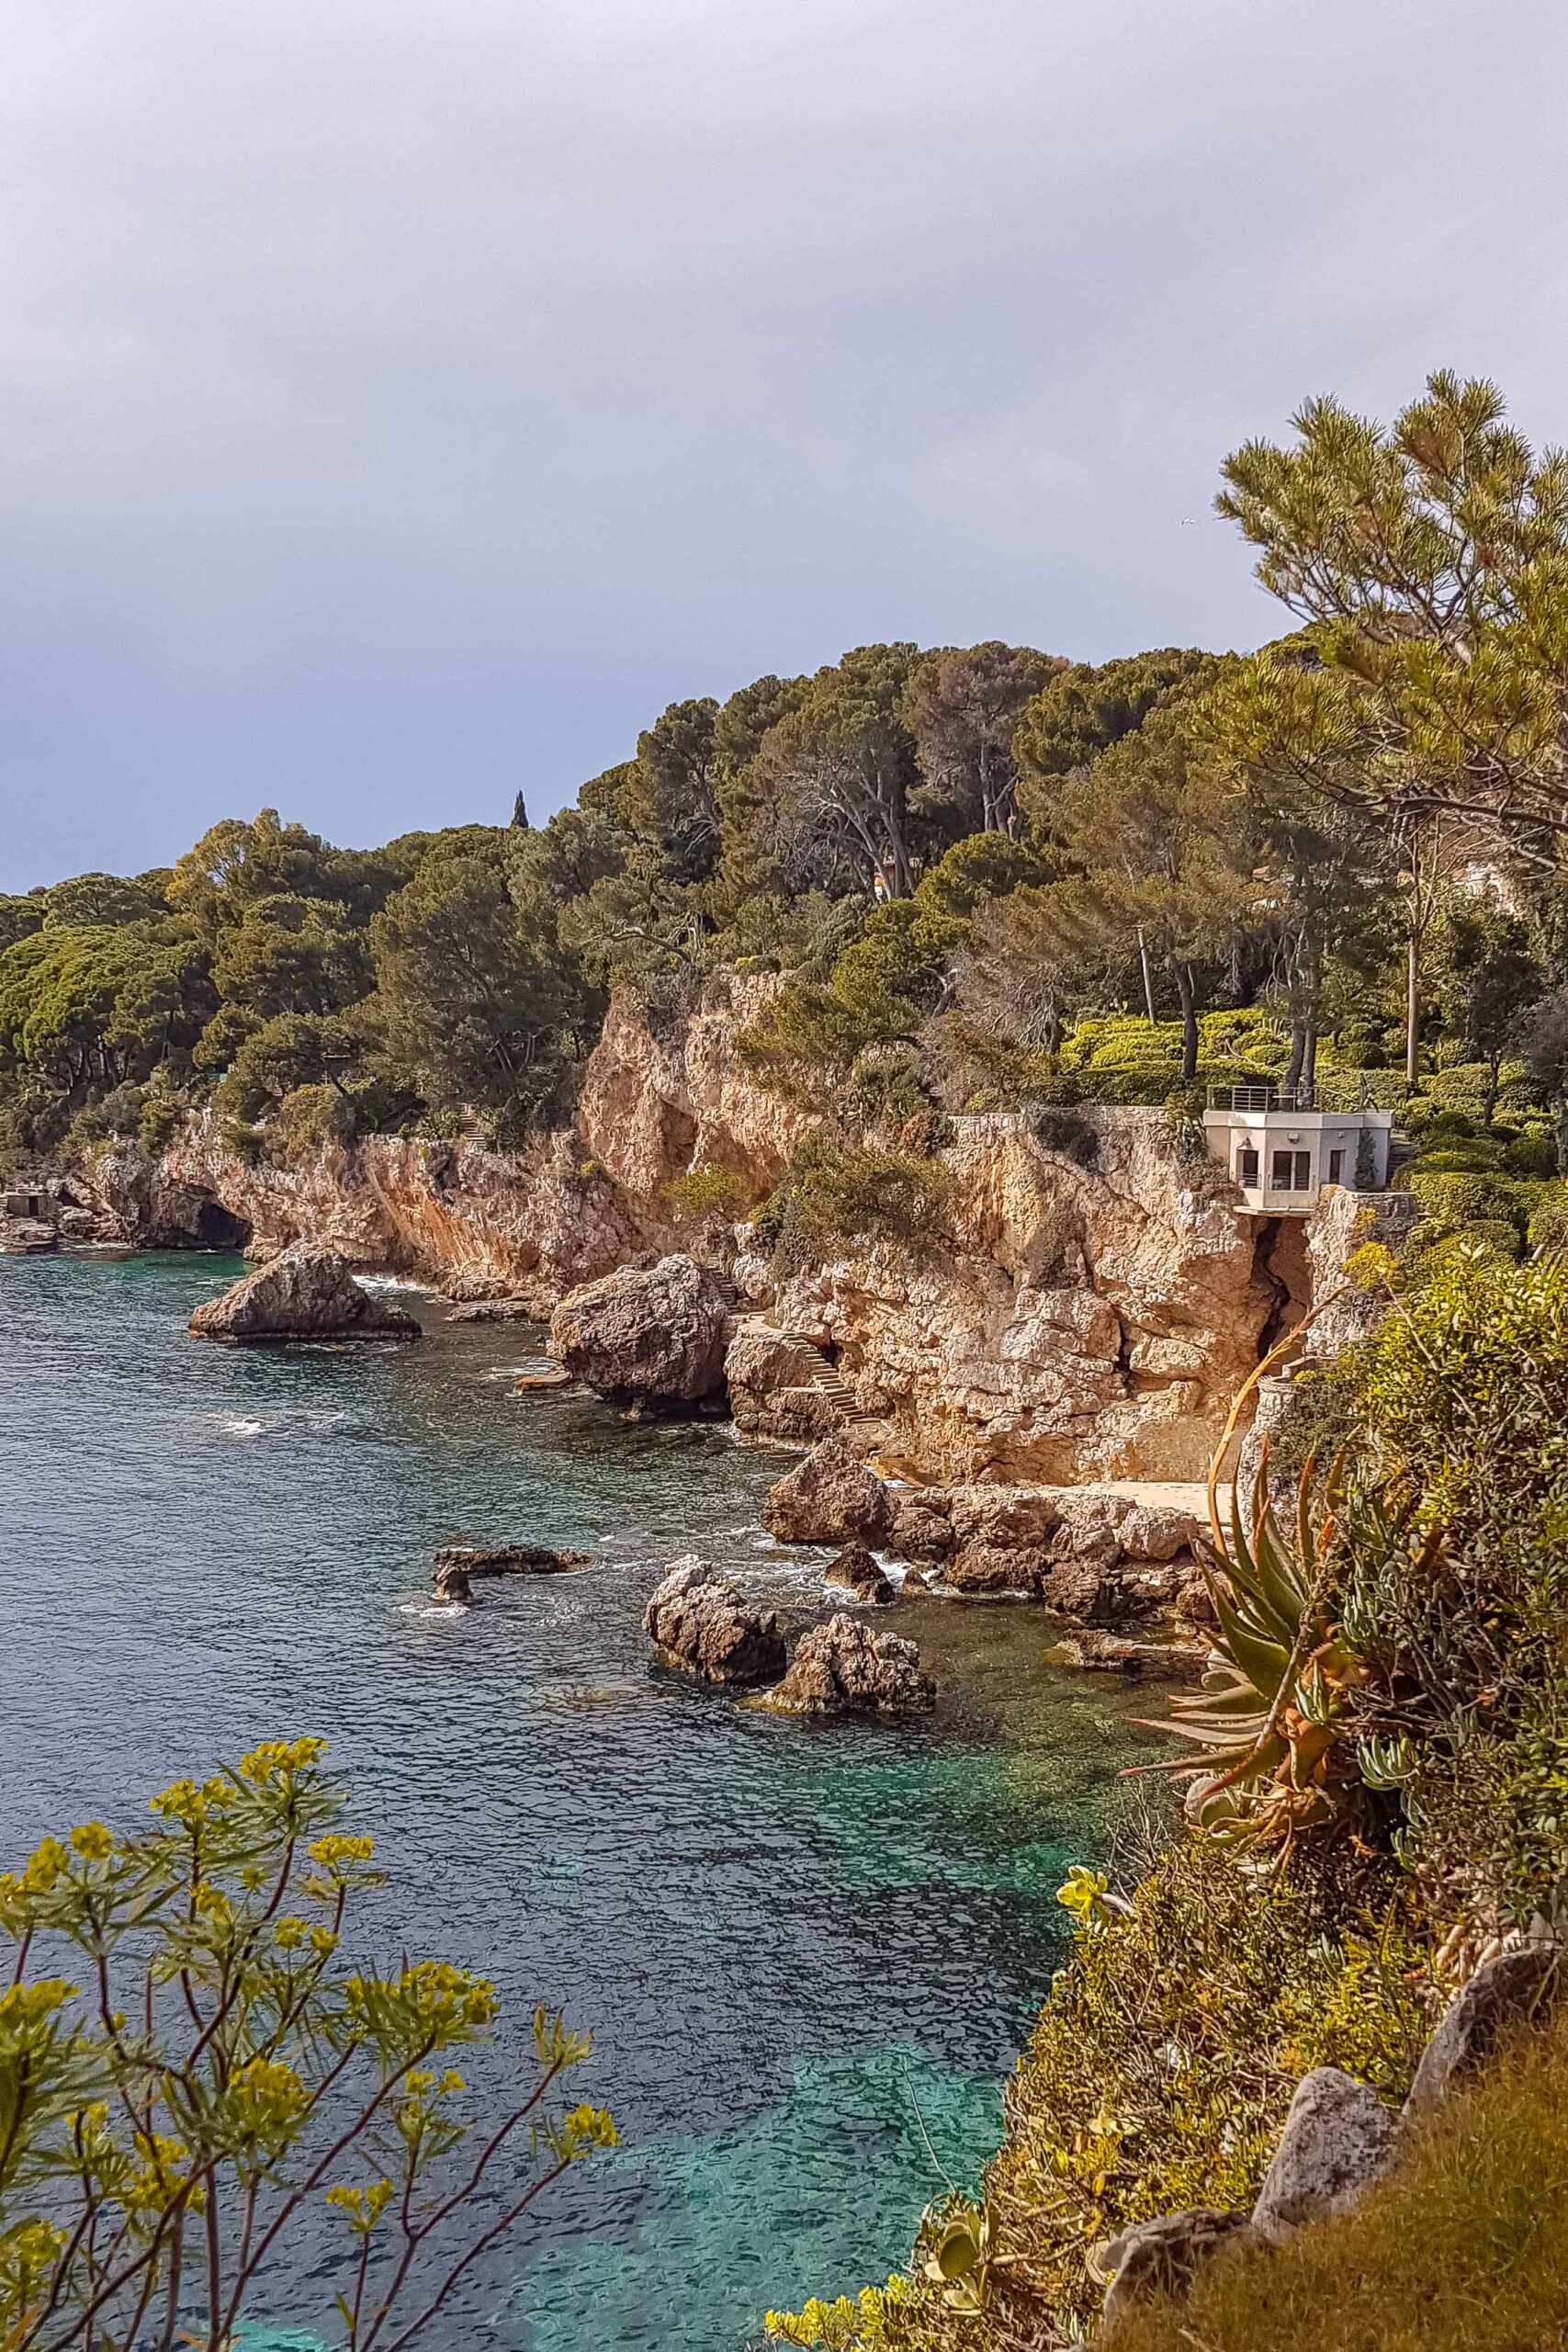 Rock cliffs and blue waters along the Sentier du Littoral hiking trail during a sunny day in Antibes, France